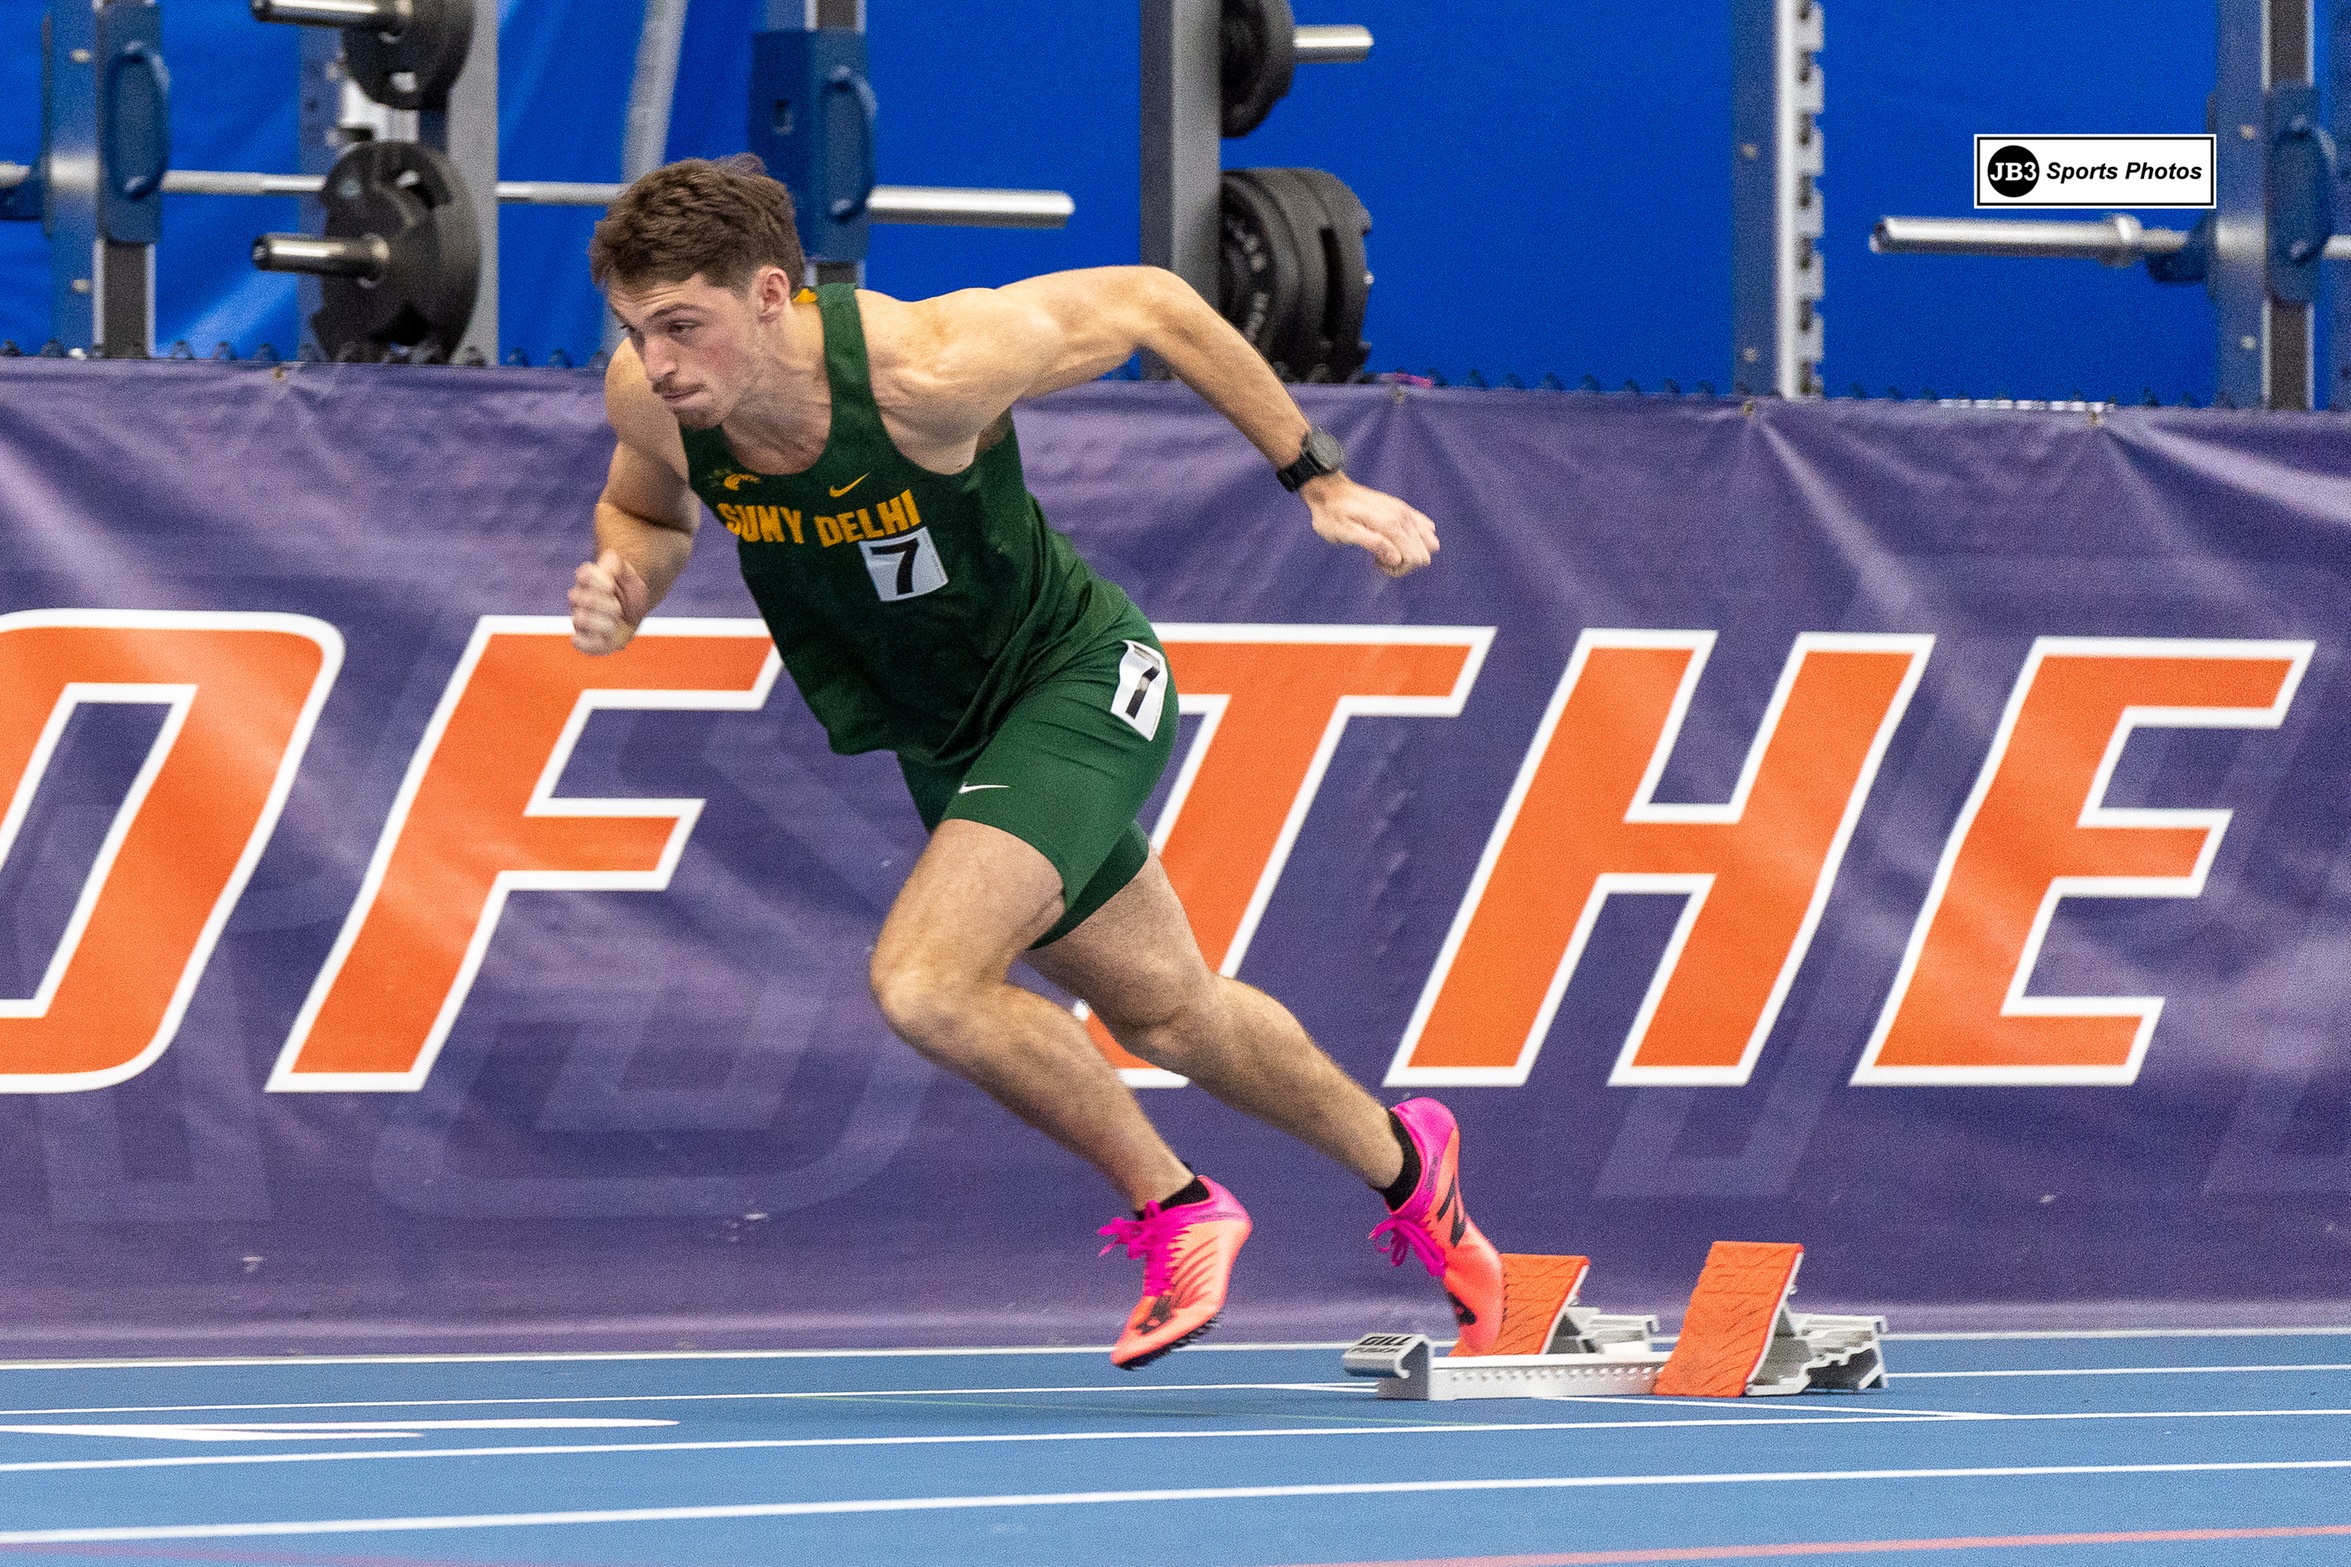 Jeffes Takes Down 400m Record, Bywater Wins 5K